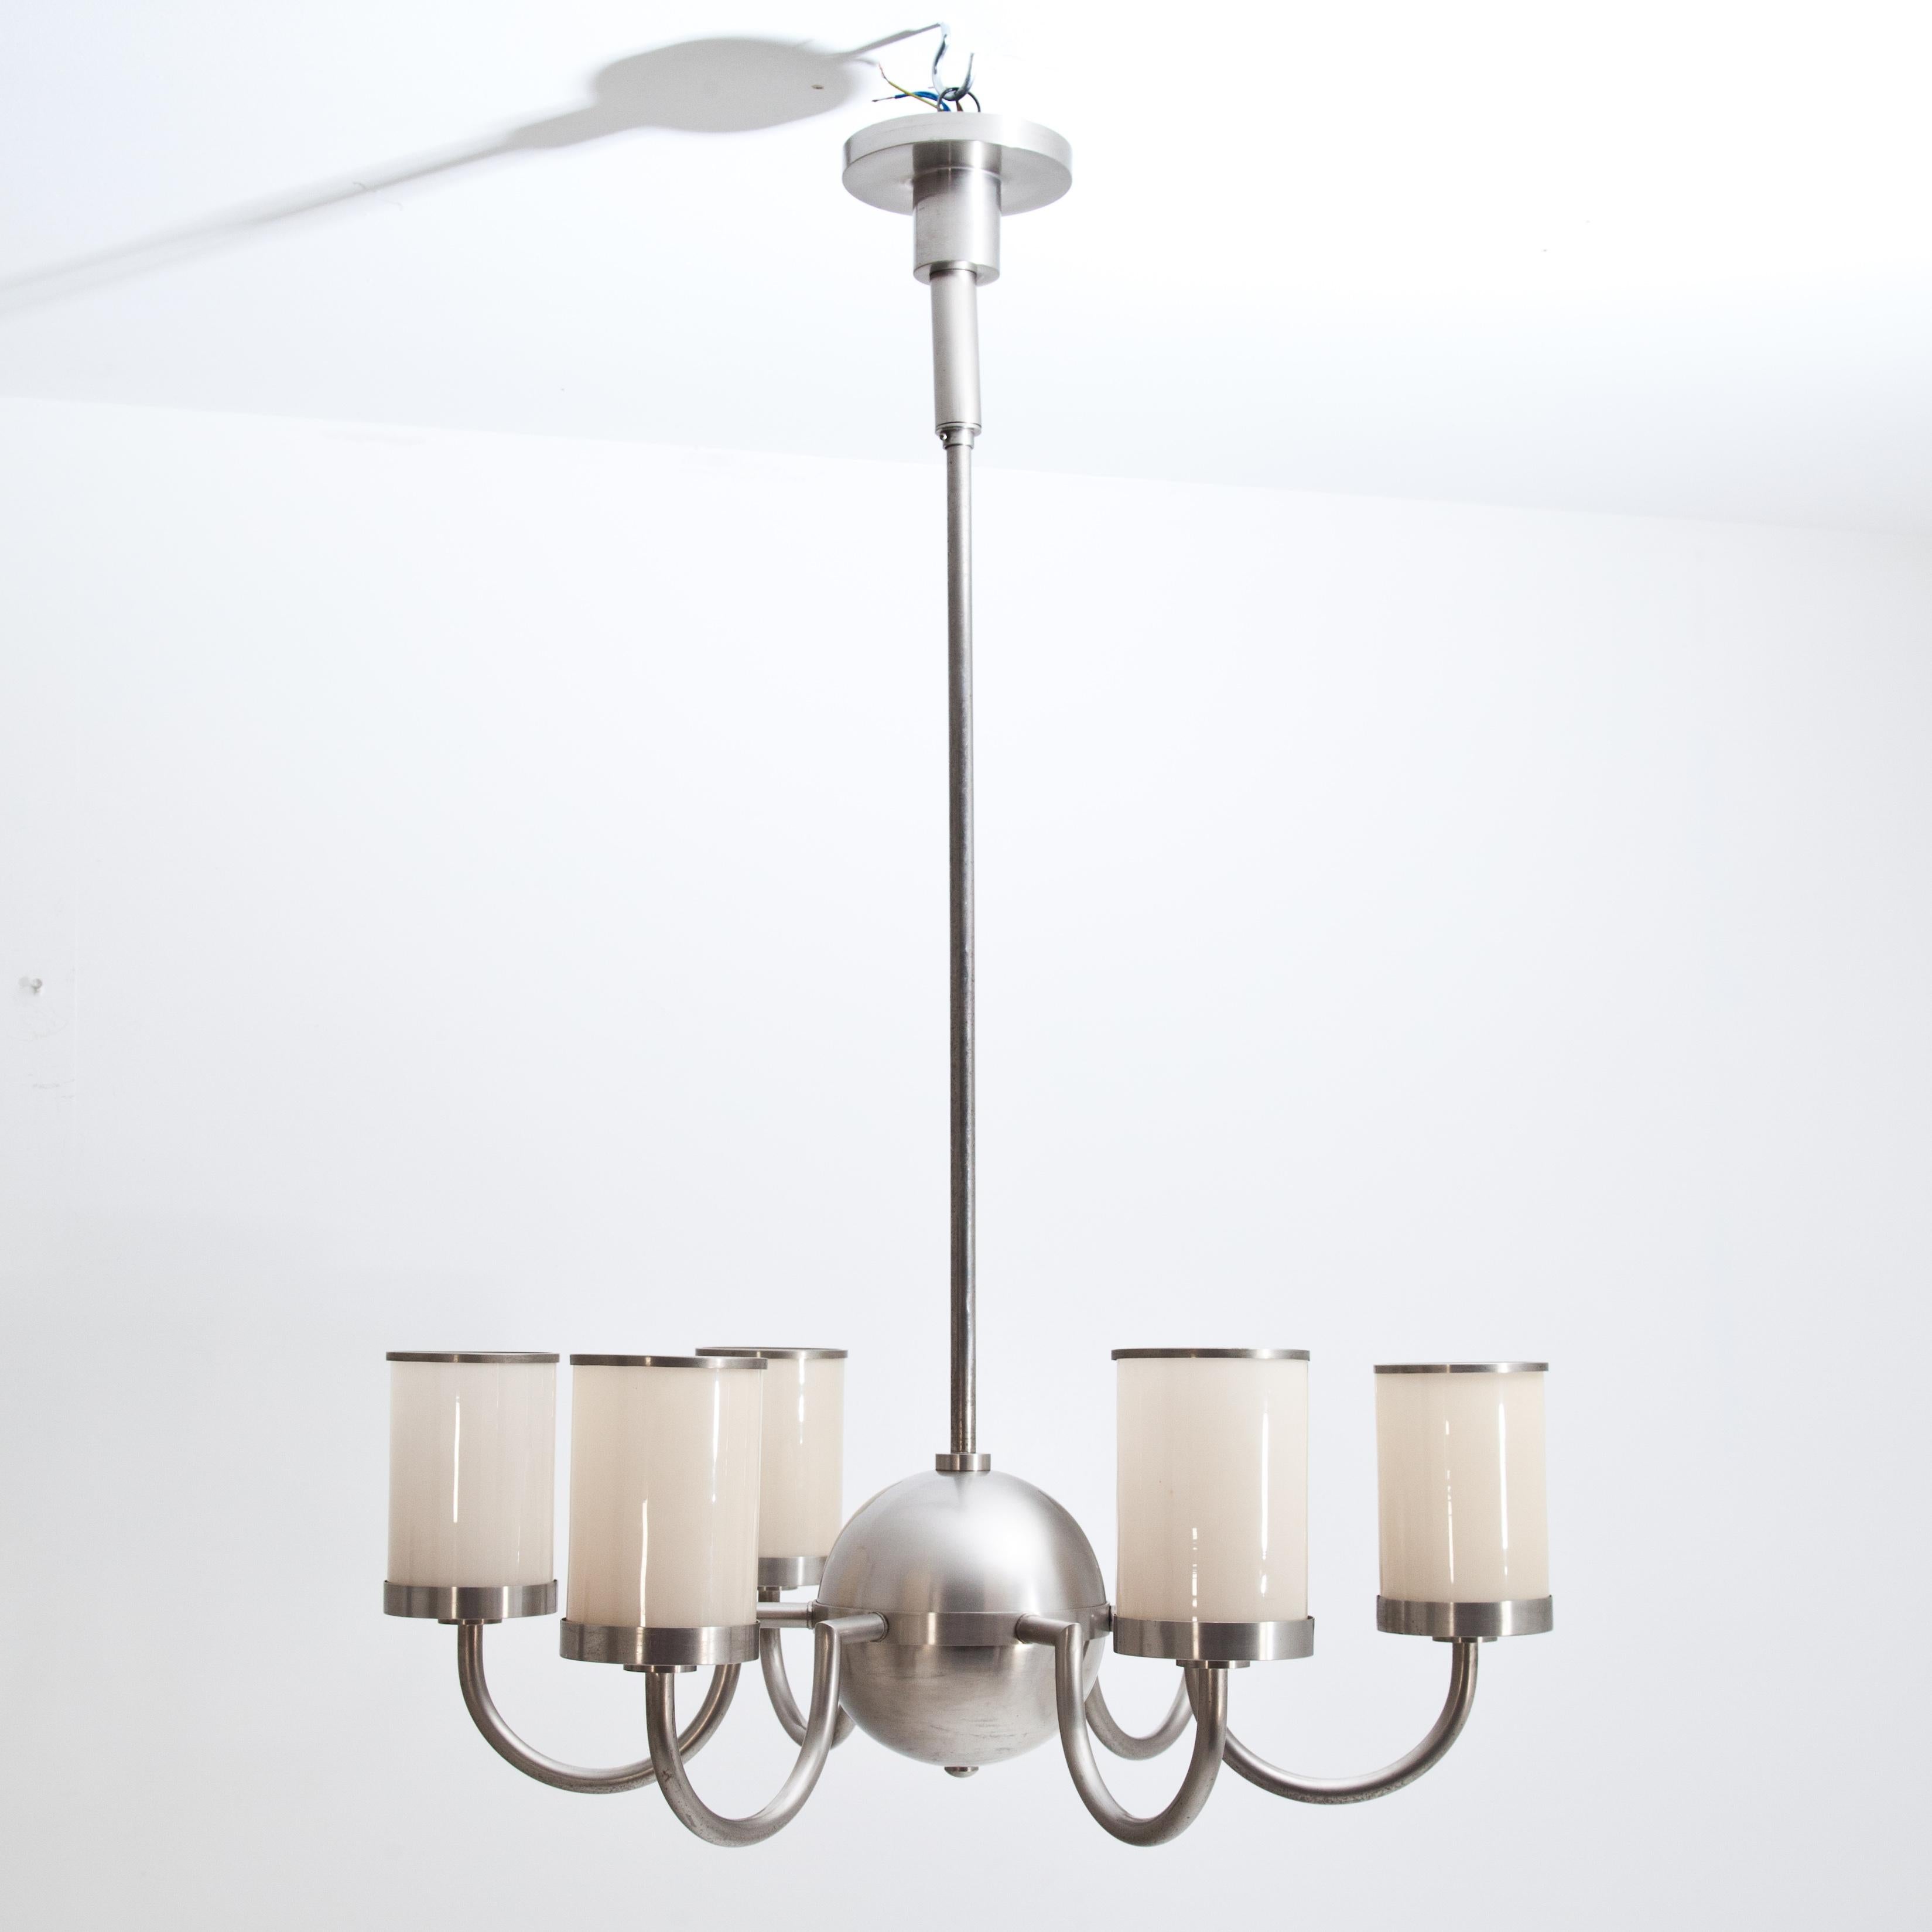 Six-armed Art Deco ceiling chandelier with cylindrical glass shades. The arched arms are grouped around the central spherical body, which is attached to a long metal rod.